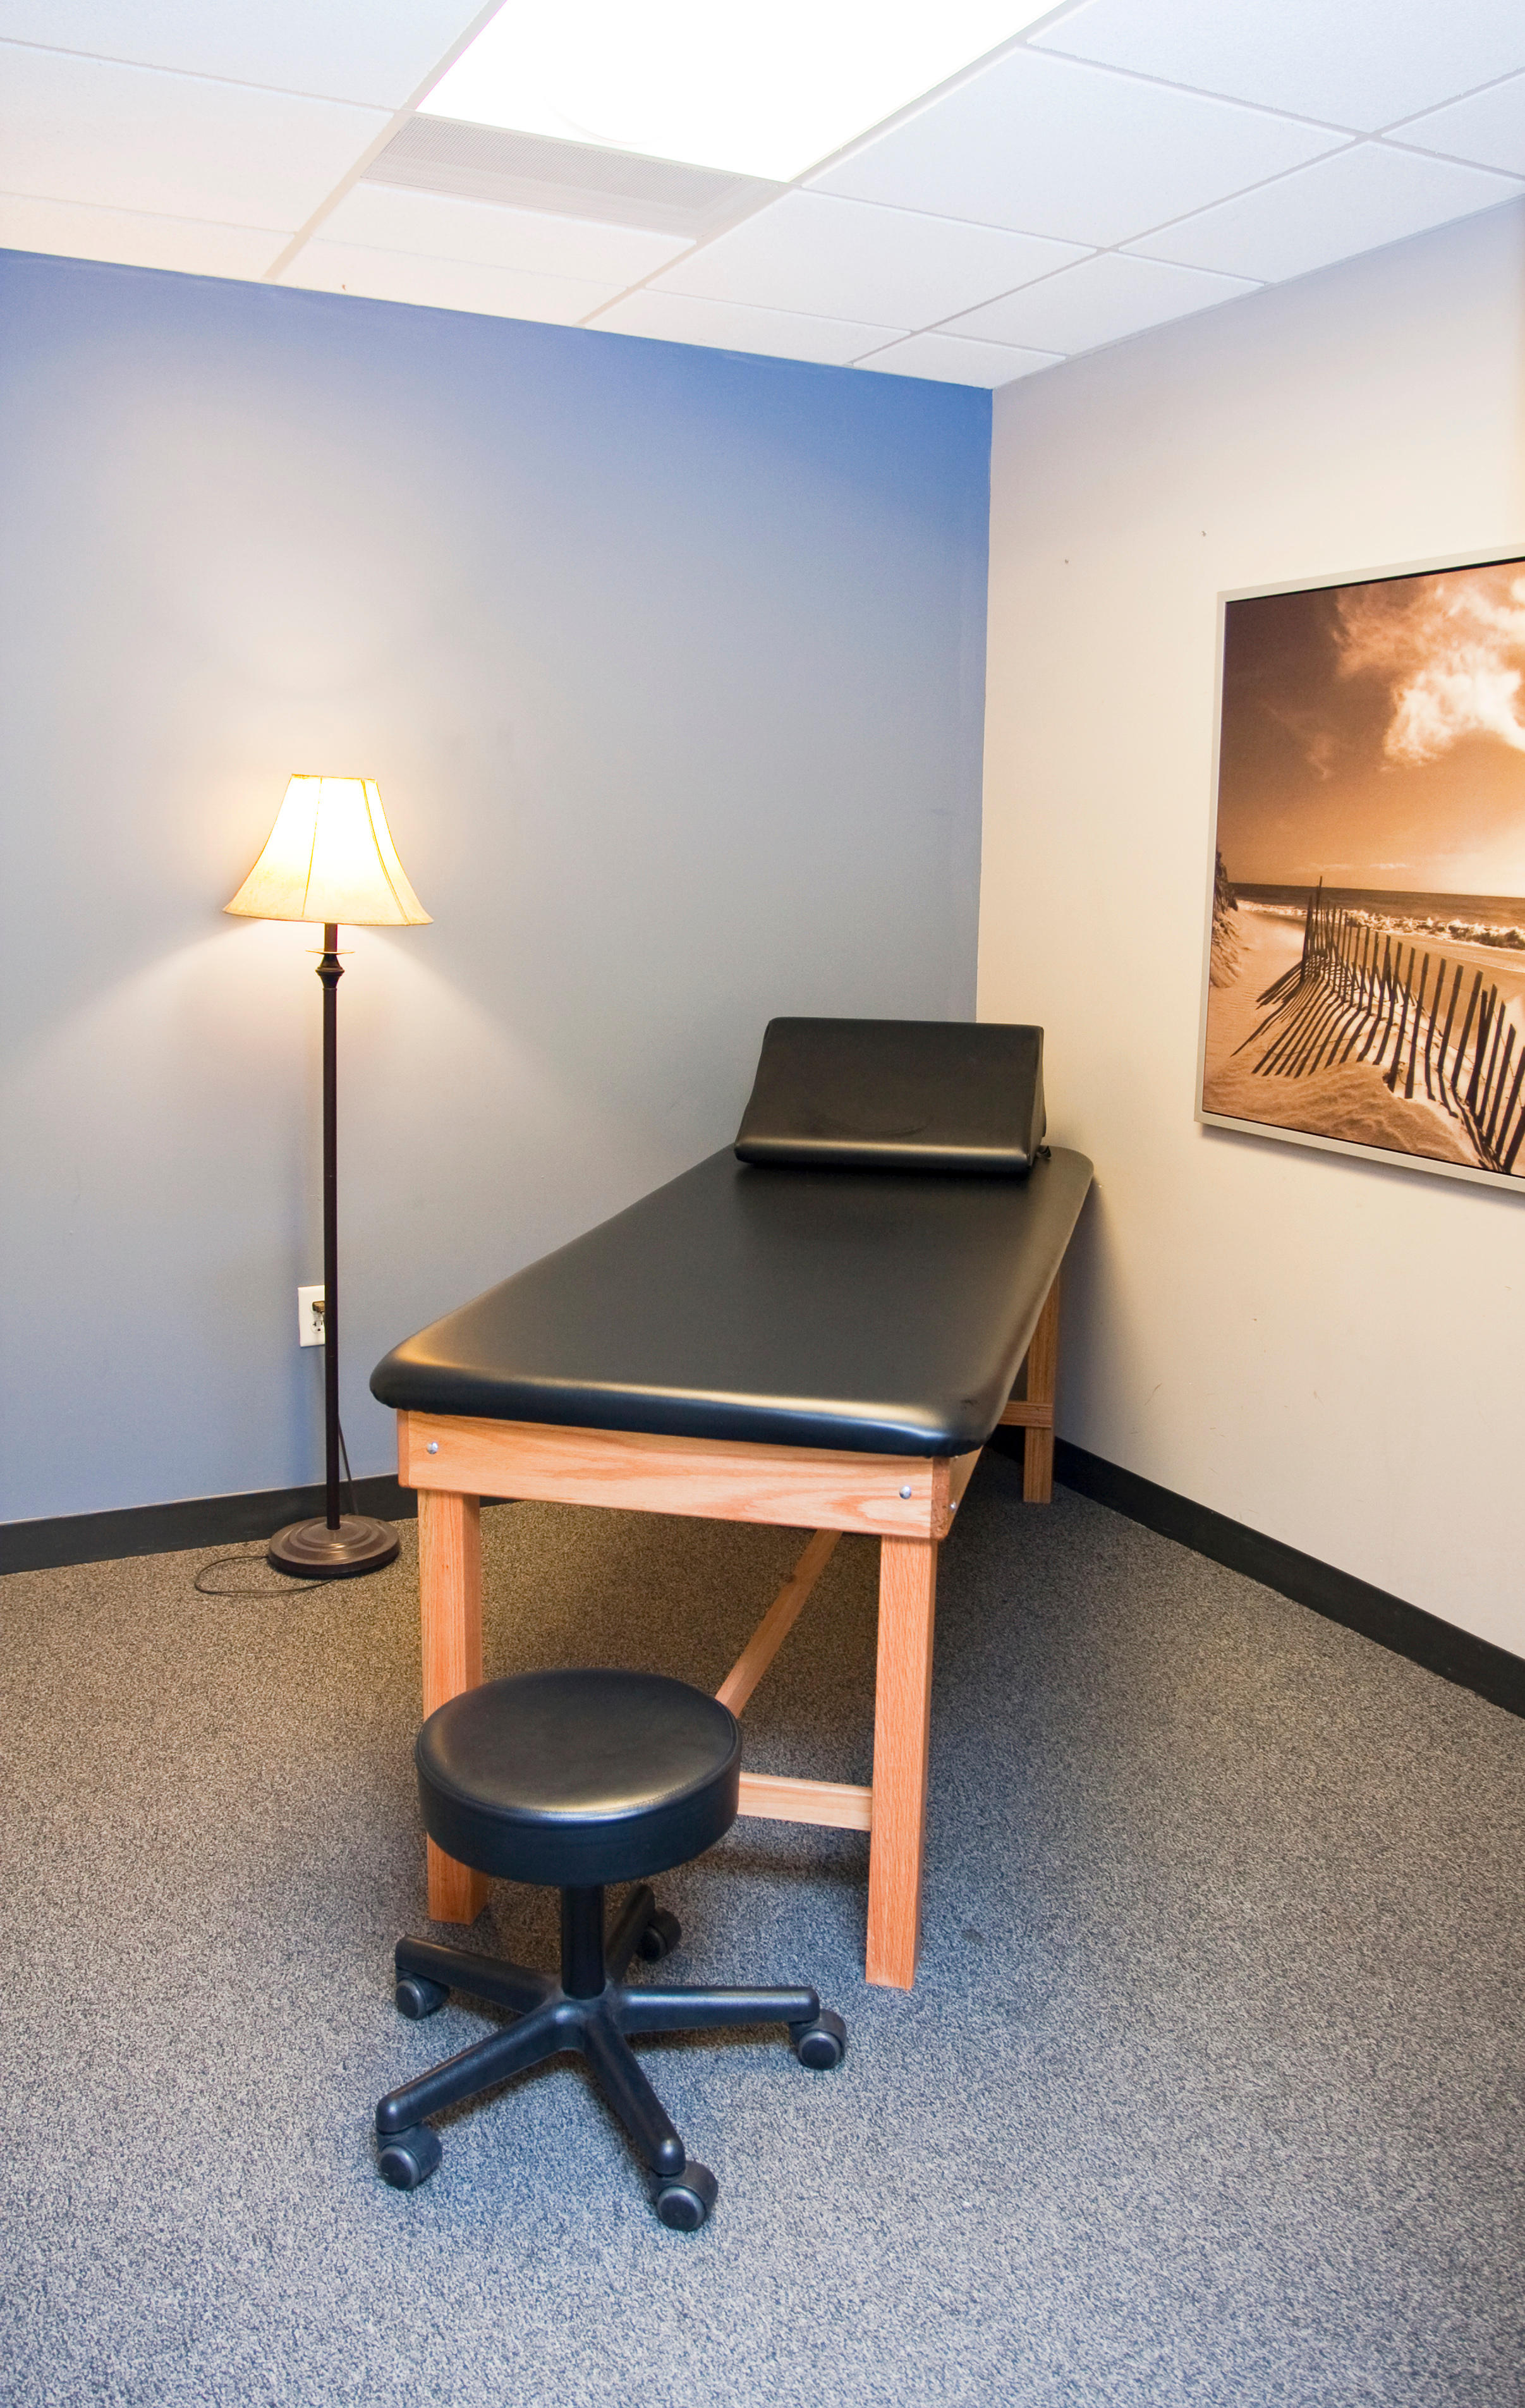 ProActive Physical Therapy 
6840 S University Blvd
Centennial